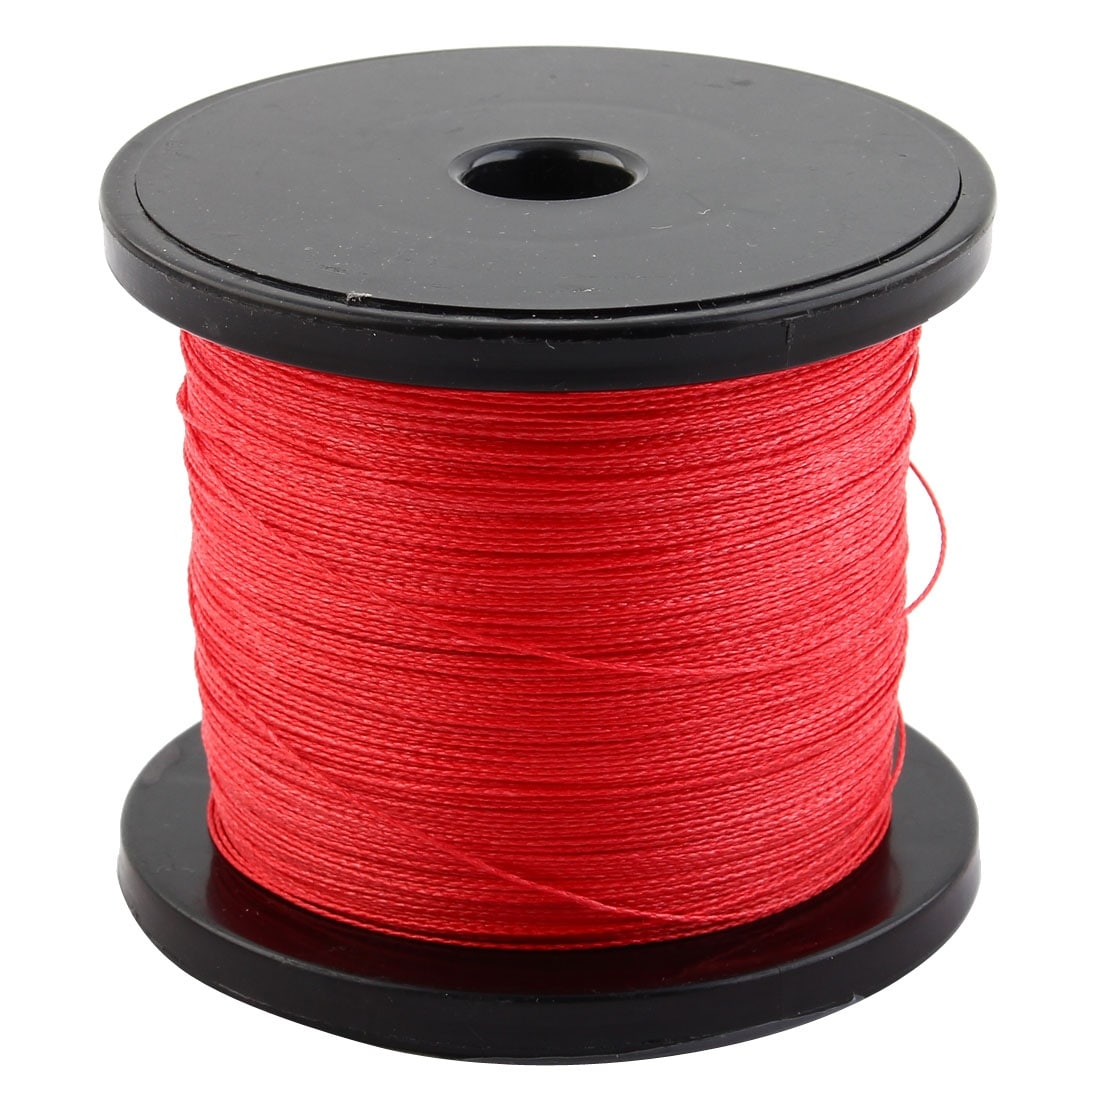 Fisherman String Jewelry Maker Fishing Line Red 500m Length - Bed Bath &  Beyond - 17613389